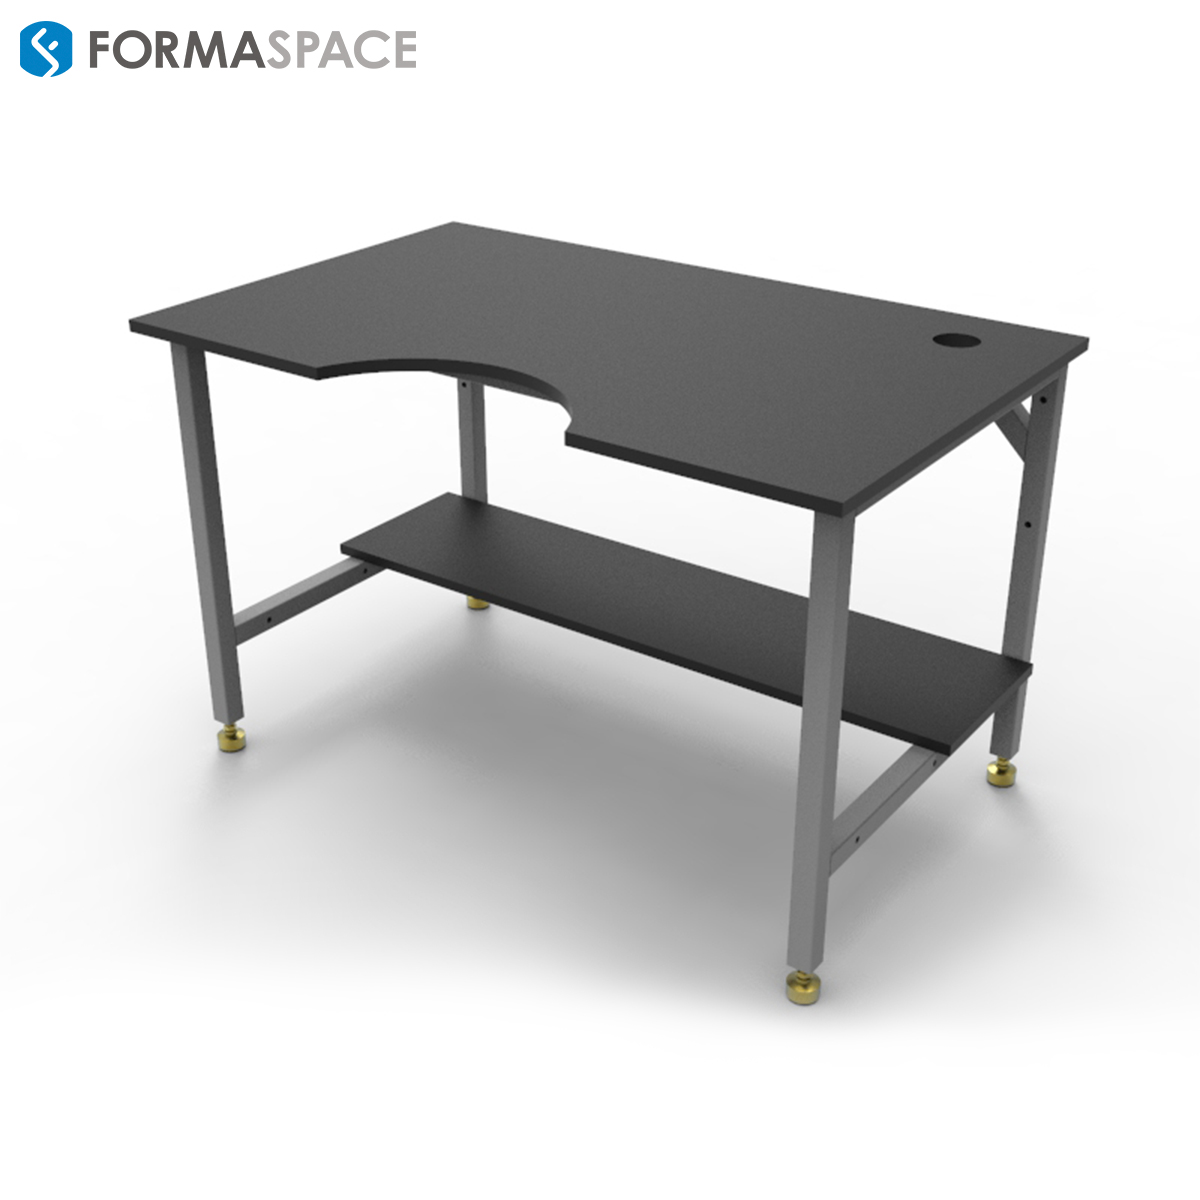 workstation for microscopes with anti vibration feet in grey with custom cutout black laminate top and lower shelf